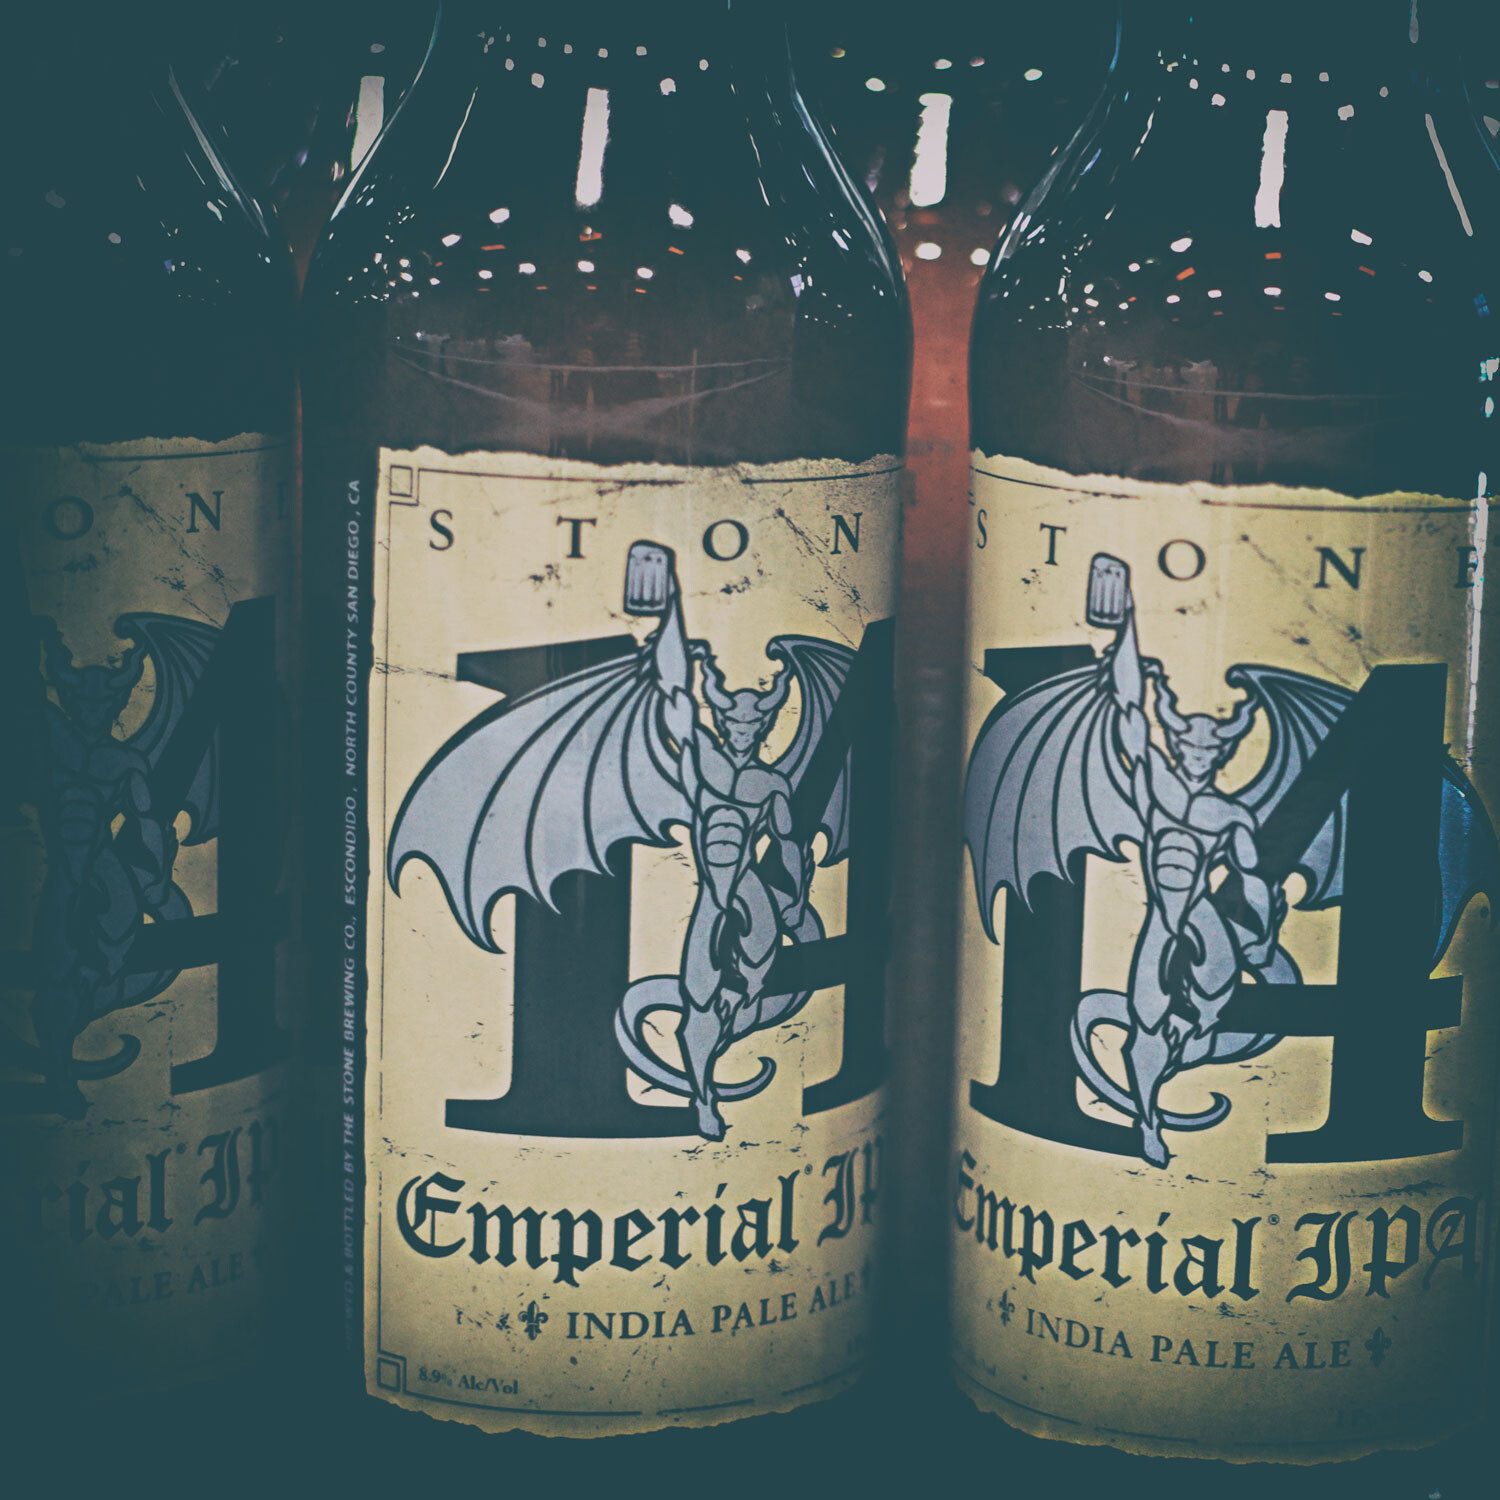 Stone 14th Anniversary Emperial IPA bottles